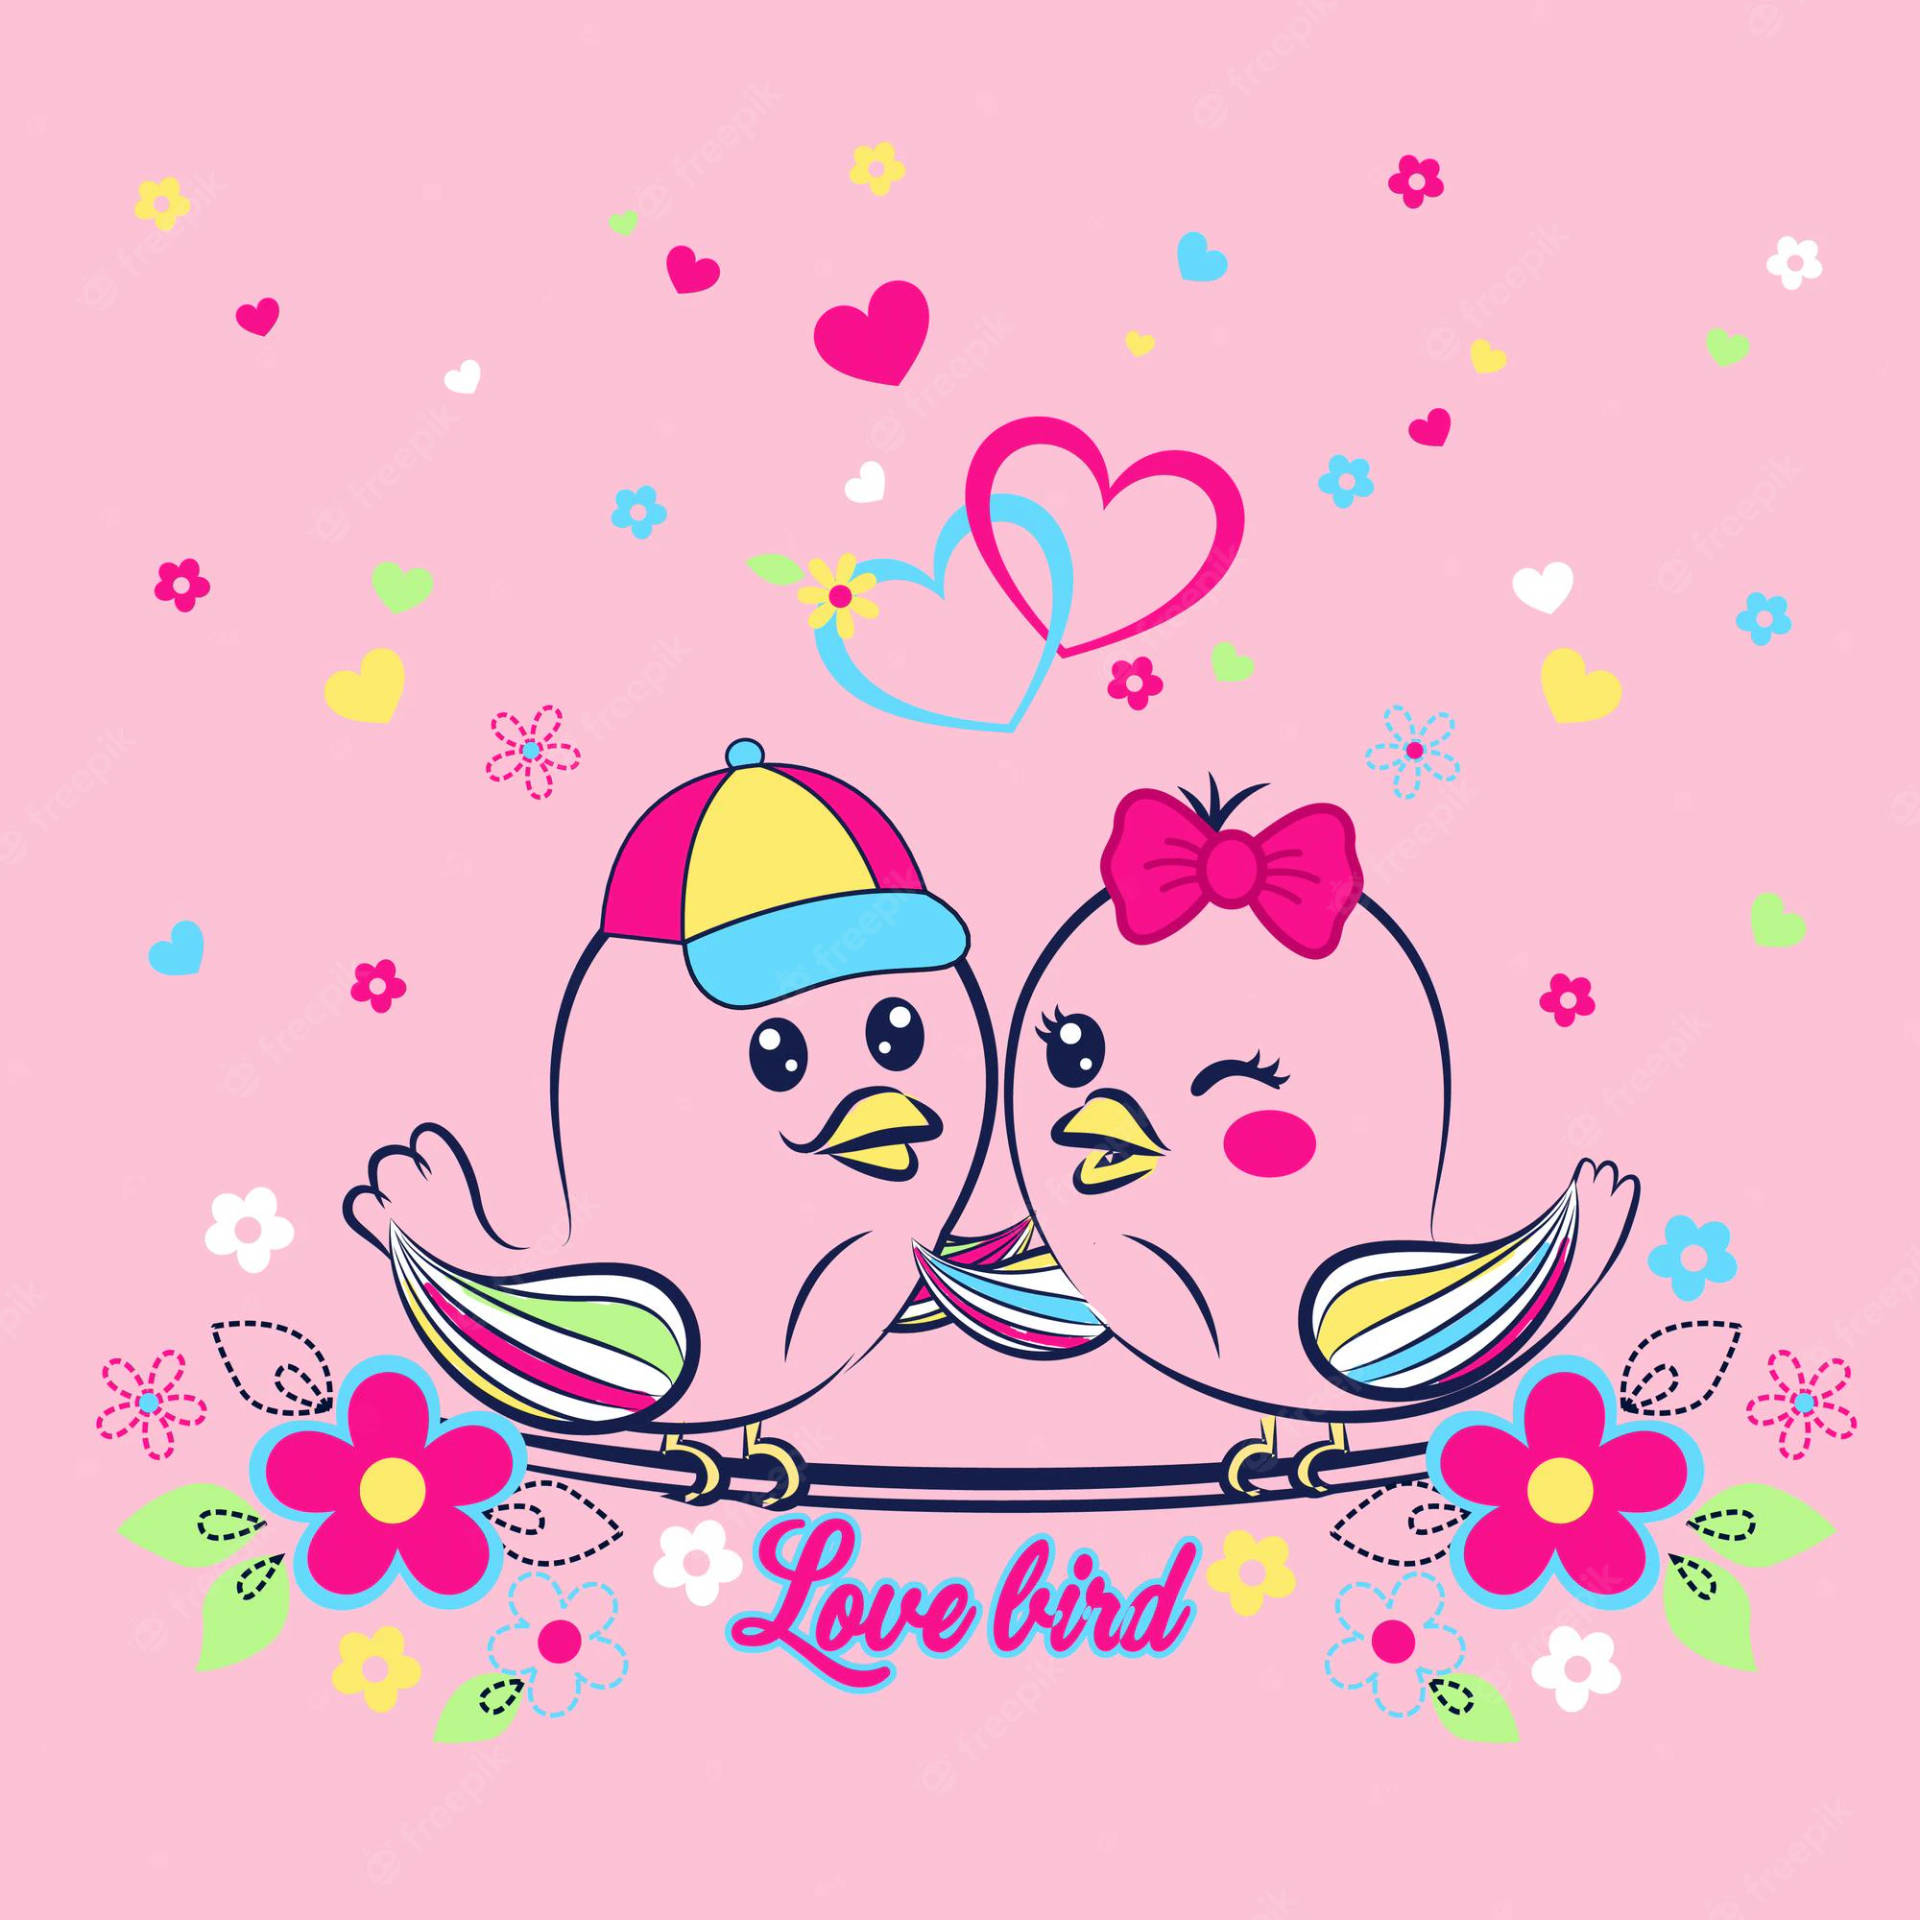 Love birds perched on a branch a tree Royalty Free Vector